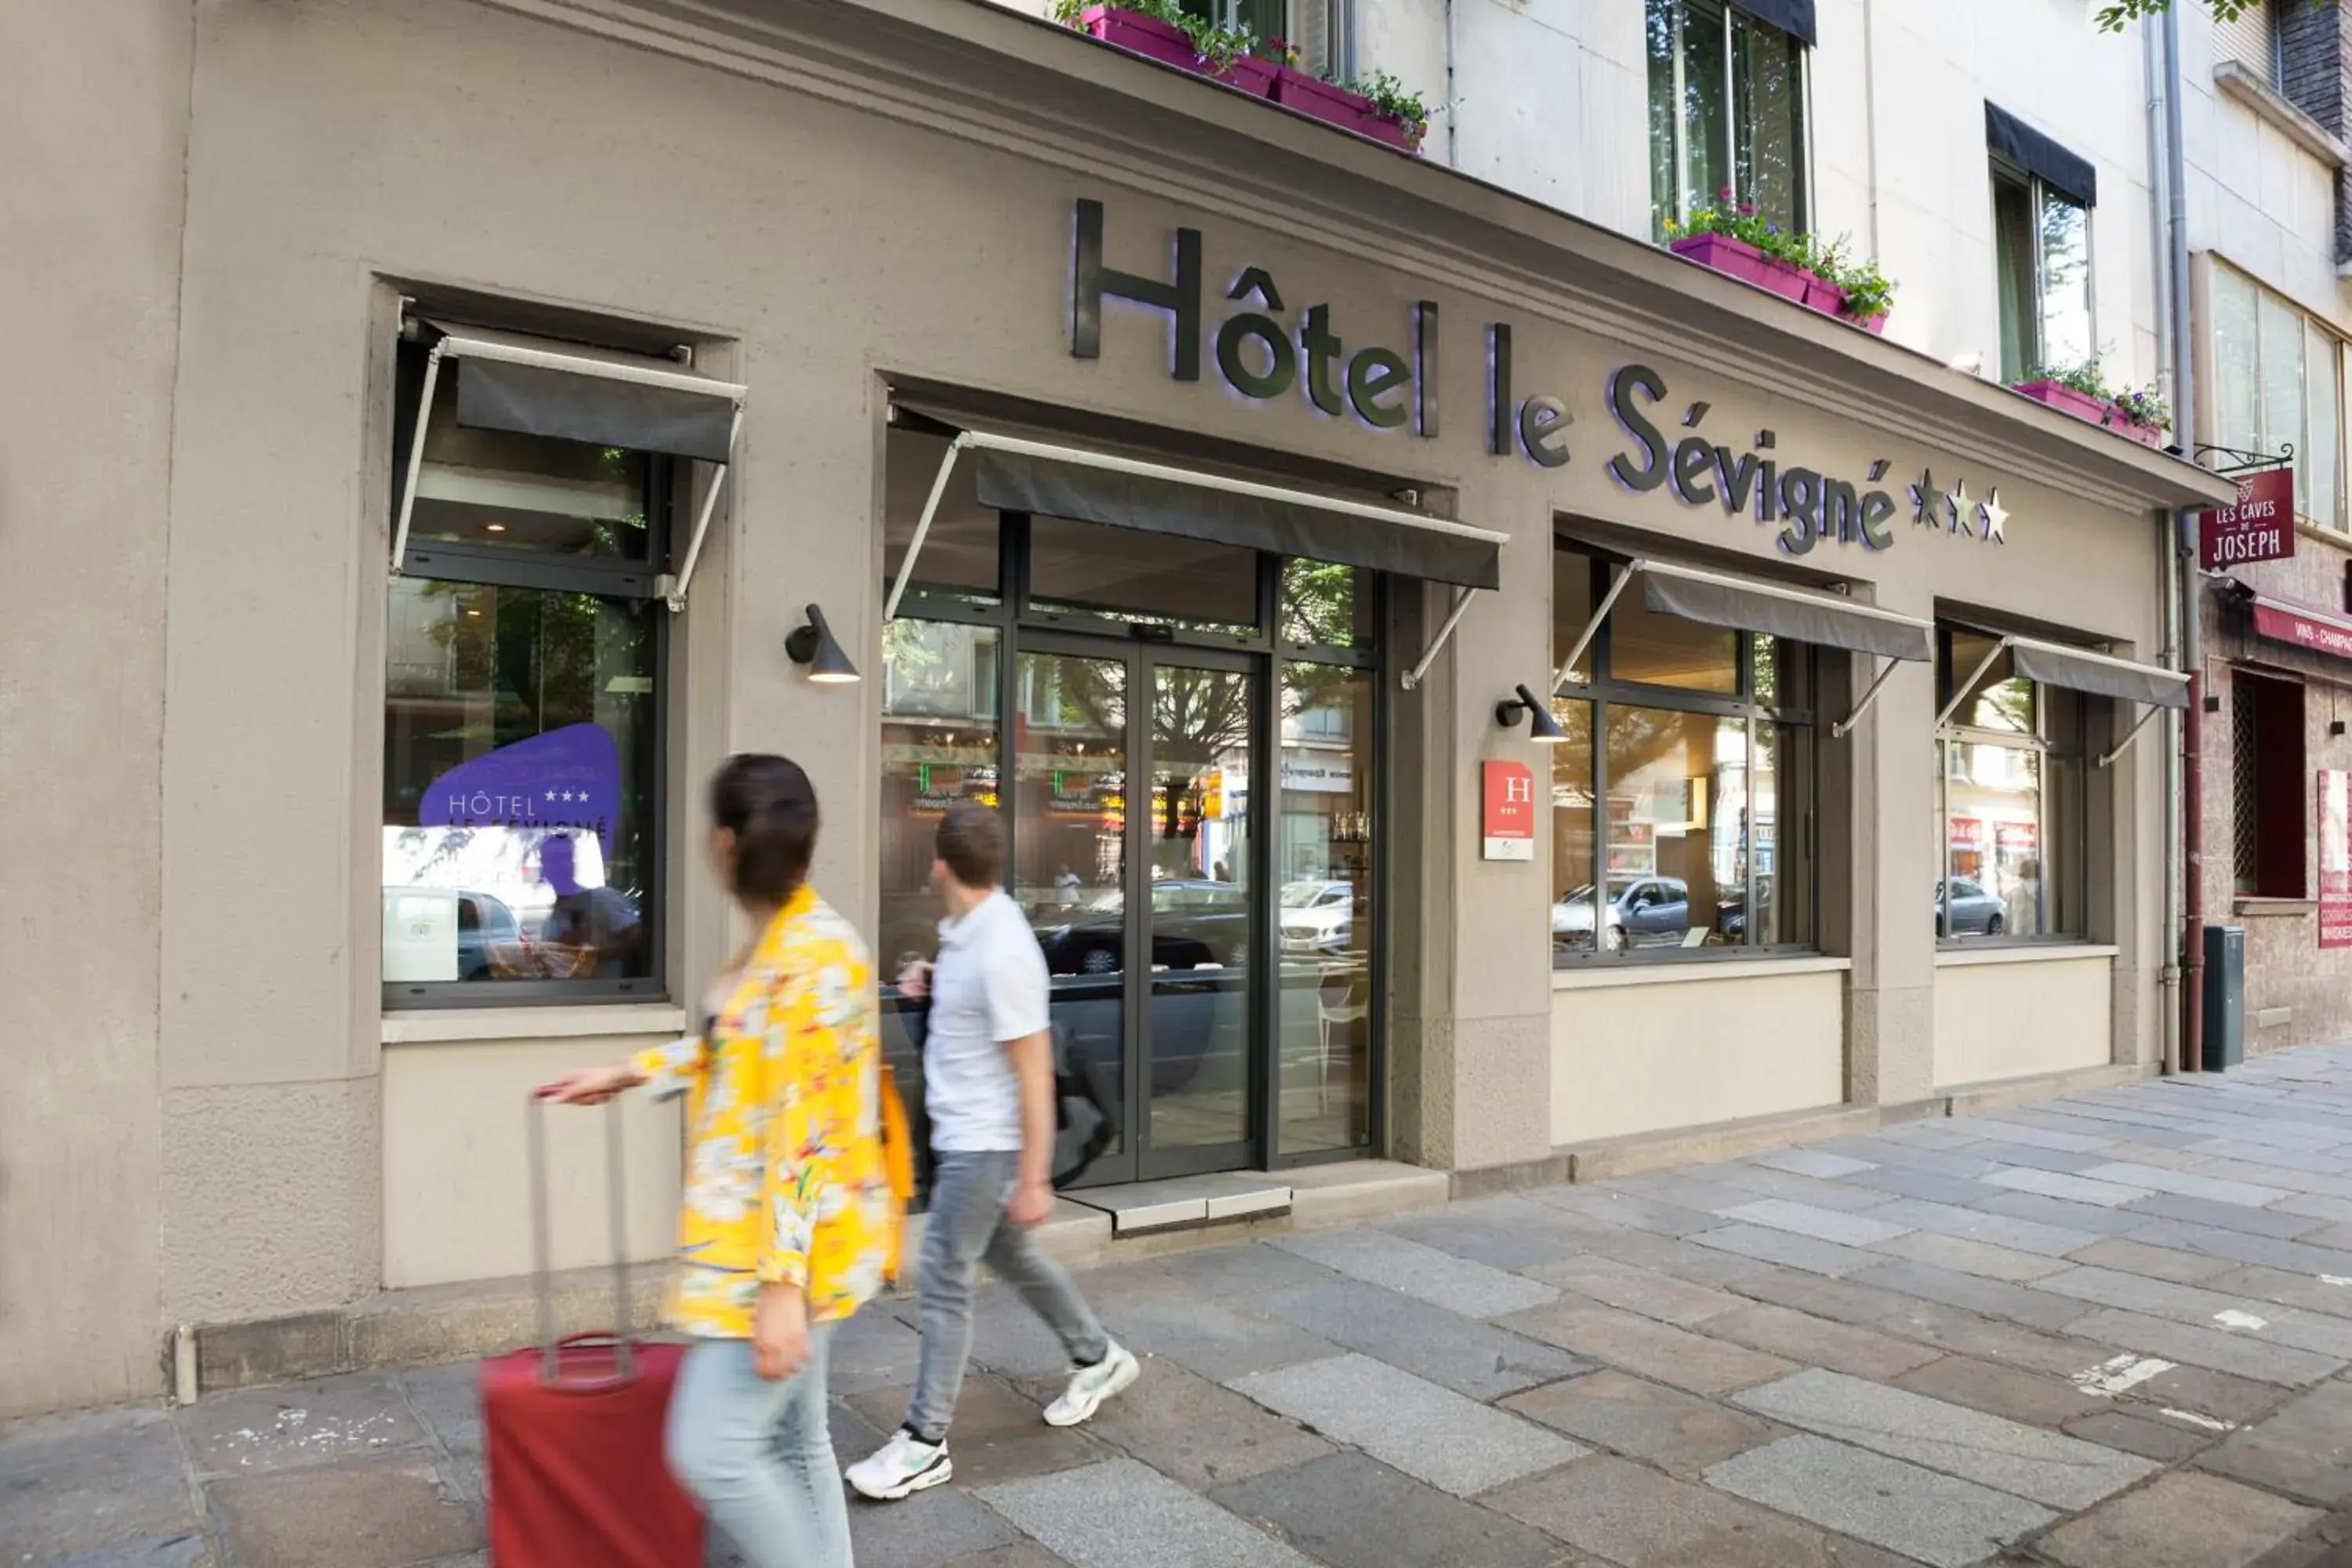 Property building in Hotel Le Sevigne - Sure Hotel Collection by Best Western